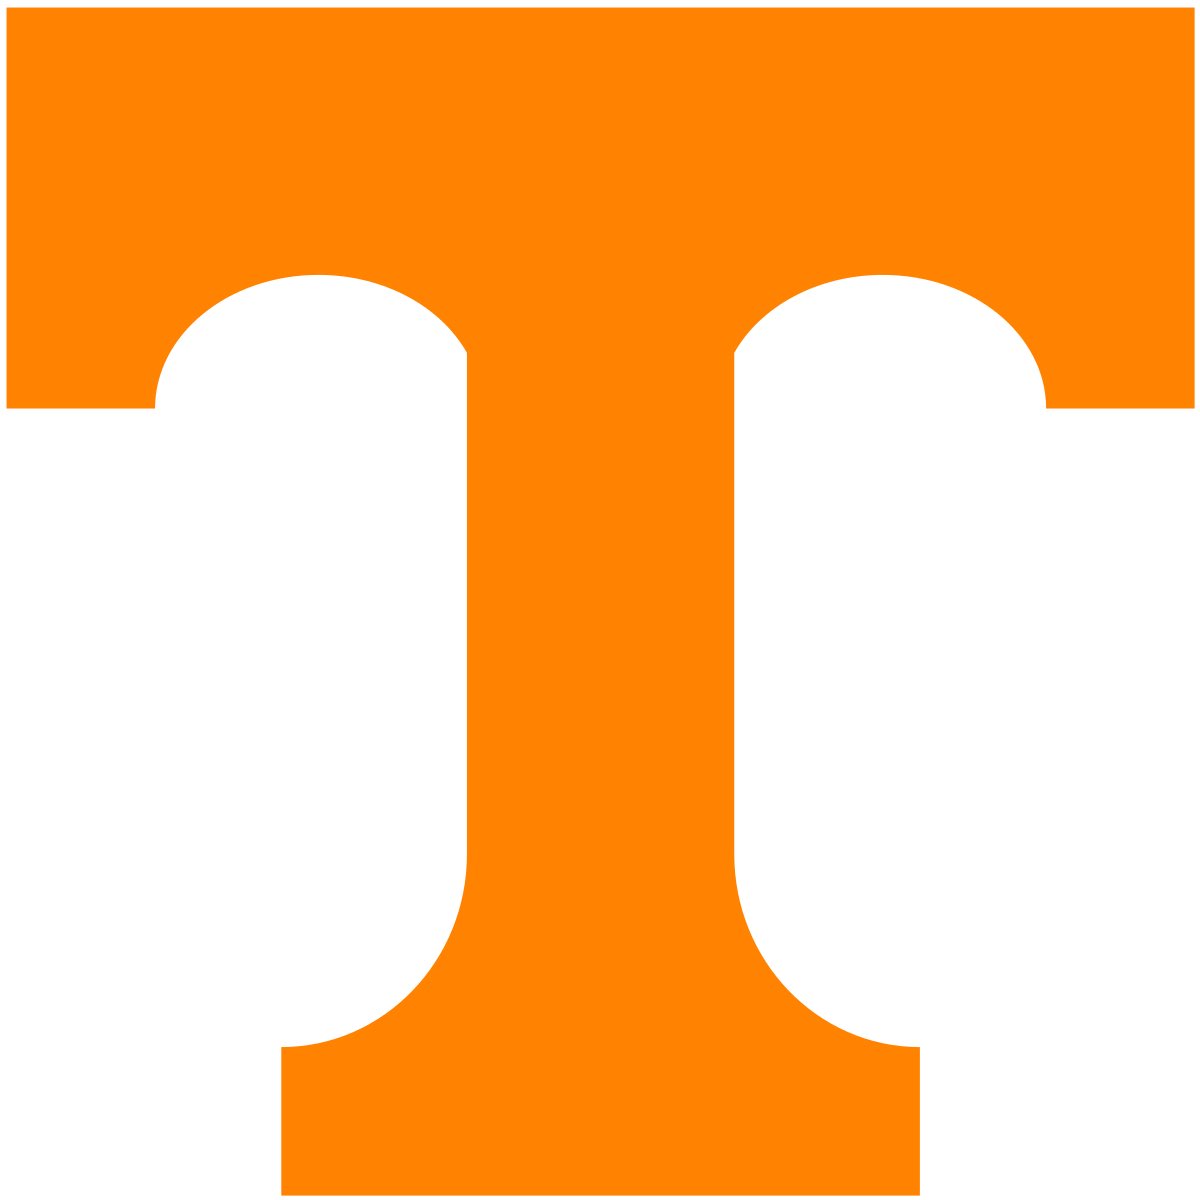 GOD DID! I am blessed and grateful to have received an offer from the University of Tennessee to further my education and athletics! @AaronAmaama @coachjoshheupel @coachg76 @Vol_Football @BlairAngulo @GregBiggins @BishopGormanFB @Coach_Cos93 @VaBranch @adamgorney